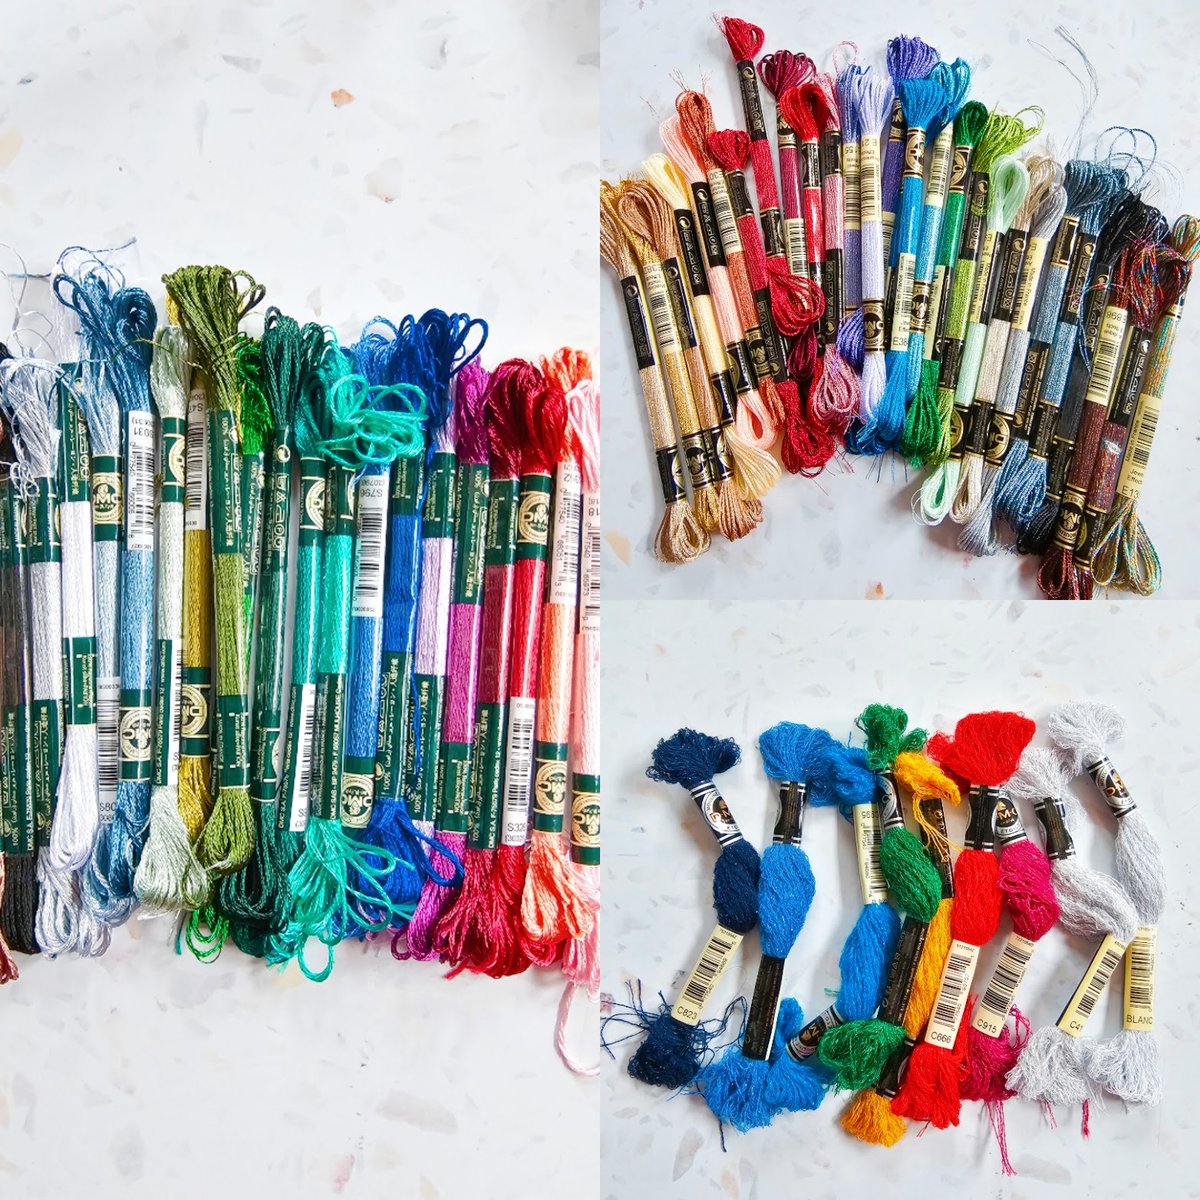 Are you an embroiderer who uses DMC Etoile, satin and metallic/light effects threads? (Or tell a friend!)
I'm keen to get rid of this lot. £35.00 incl. postage in the UK.
9 x Etoile.
23 x satin.
28 x various effects.
#Embroidery #UKEmbroidery #BritishStitchers #DMCThreads